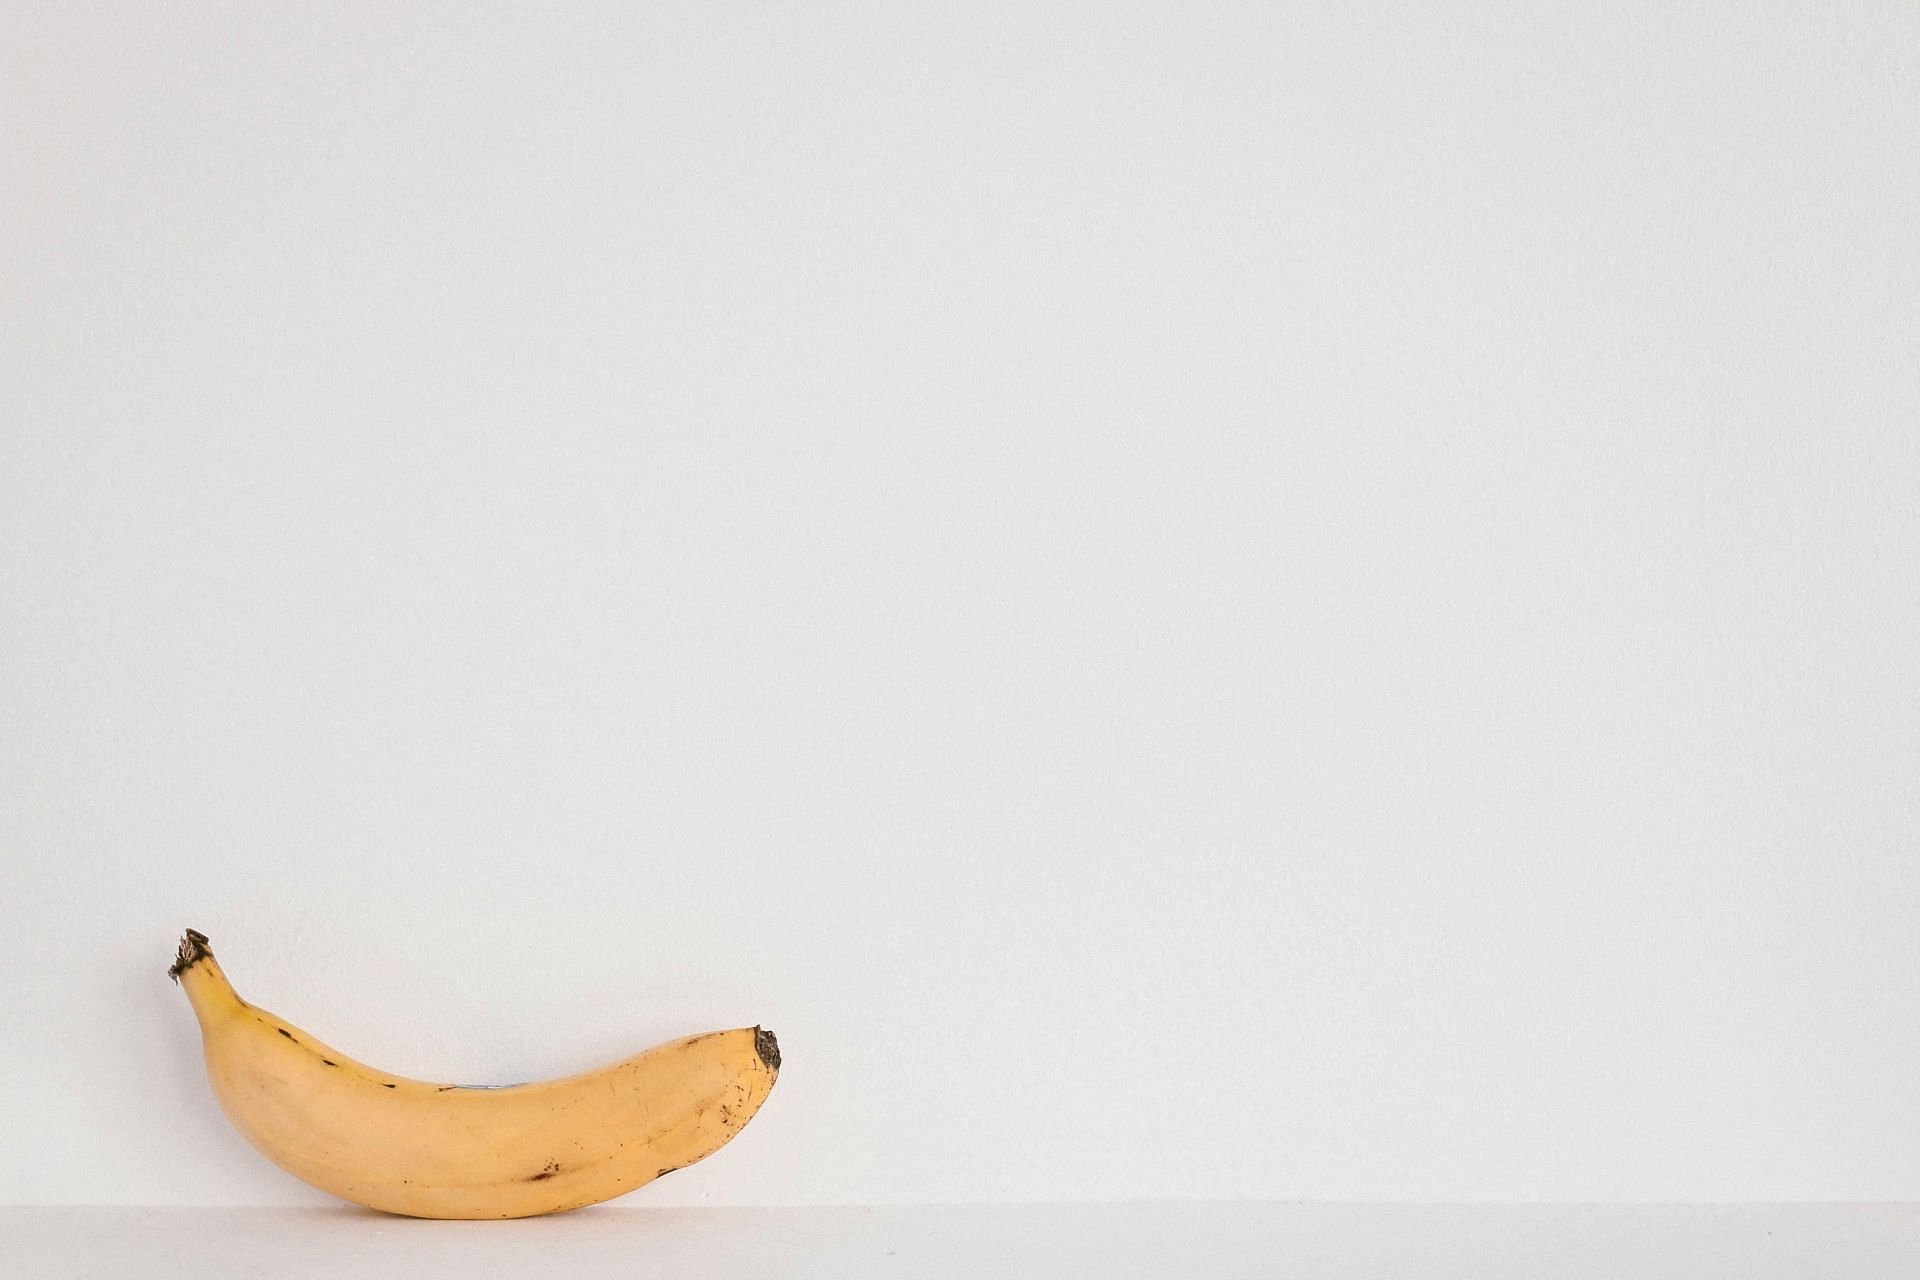 morning banana diet (image sourced via Pexels / Photo by andreea)